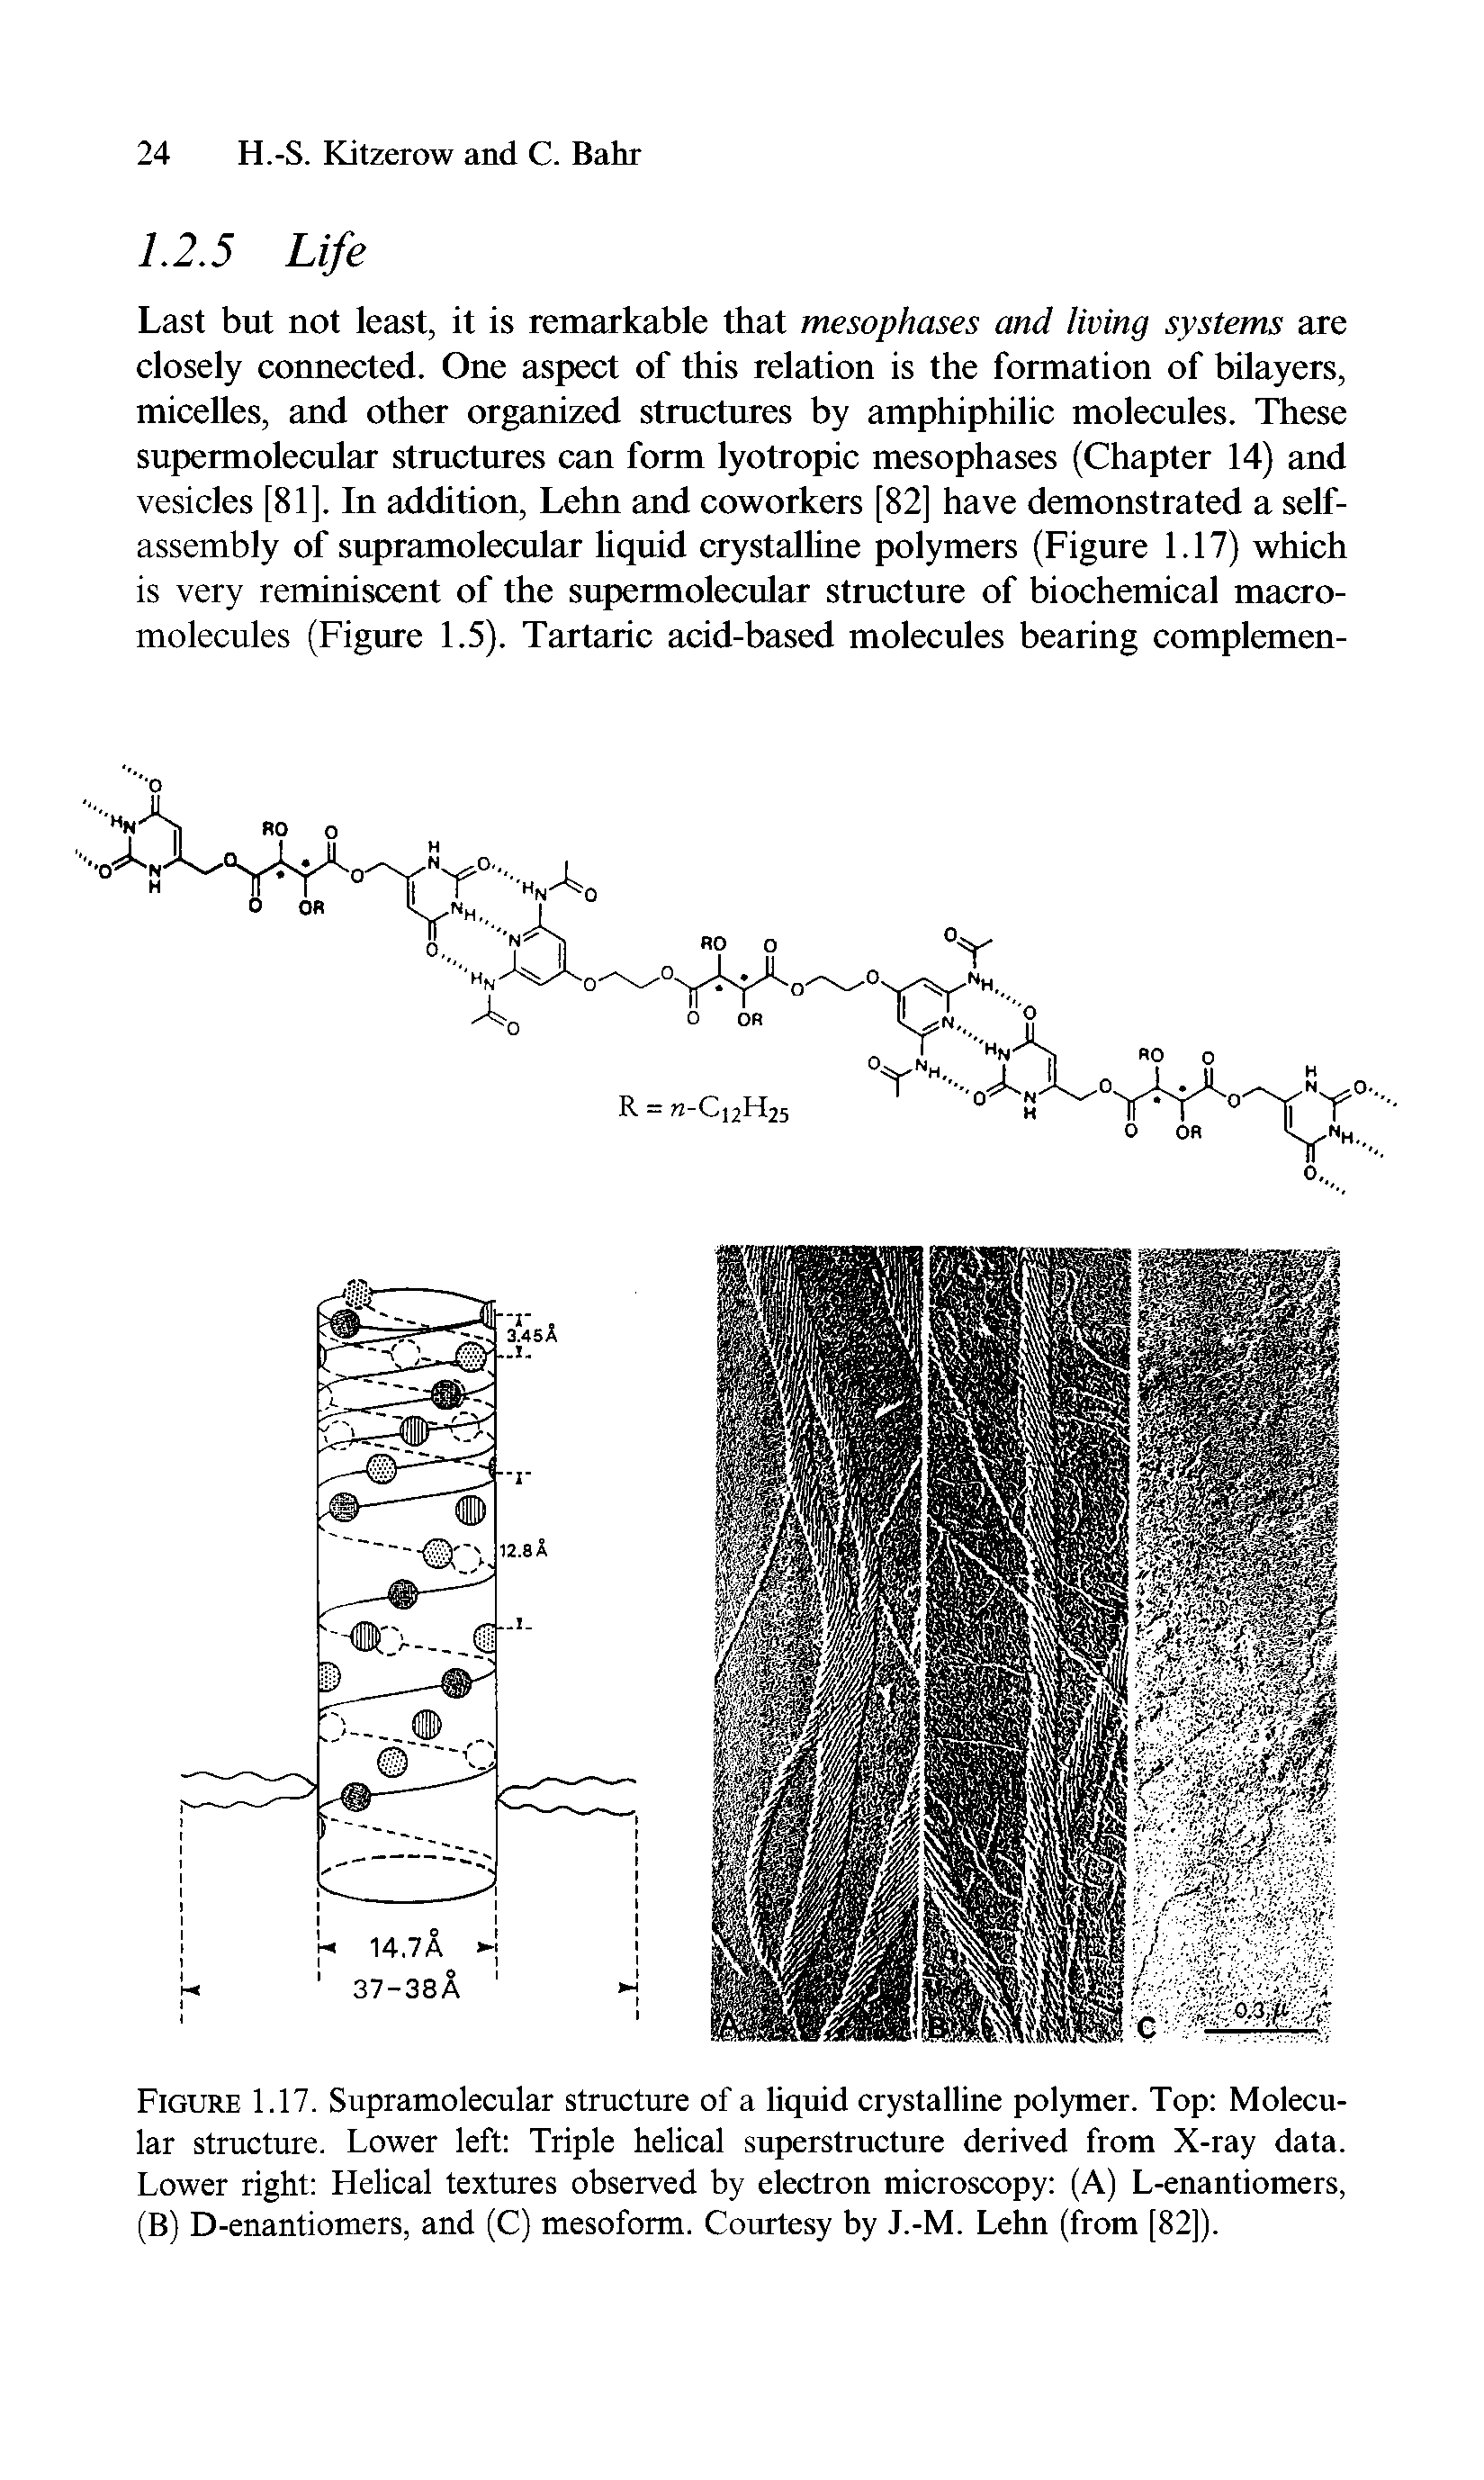 Figure 1.17. Supramolecular structure of a liquid crystalline polymer. Top Molecular structure. Lower left Triple helical superstructure derived from X-ray data. Lower right Helical textures observed by electron microscopy (A) L-enantiomers, (B) D-enantiomers, and (C) mesoform. Courtesy by J.-M. Lehn (from [82]).